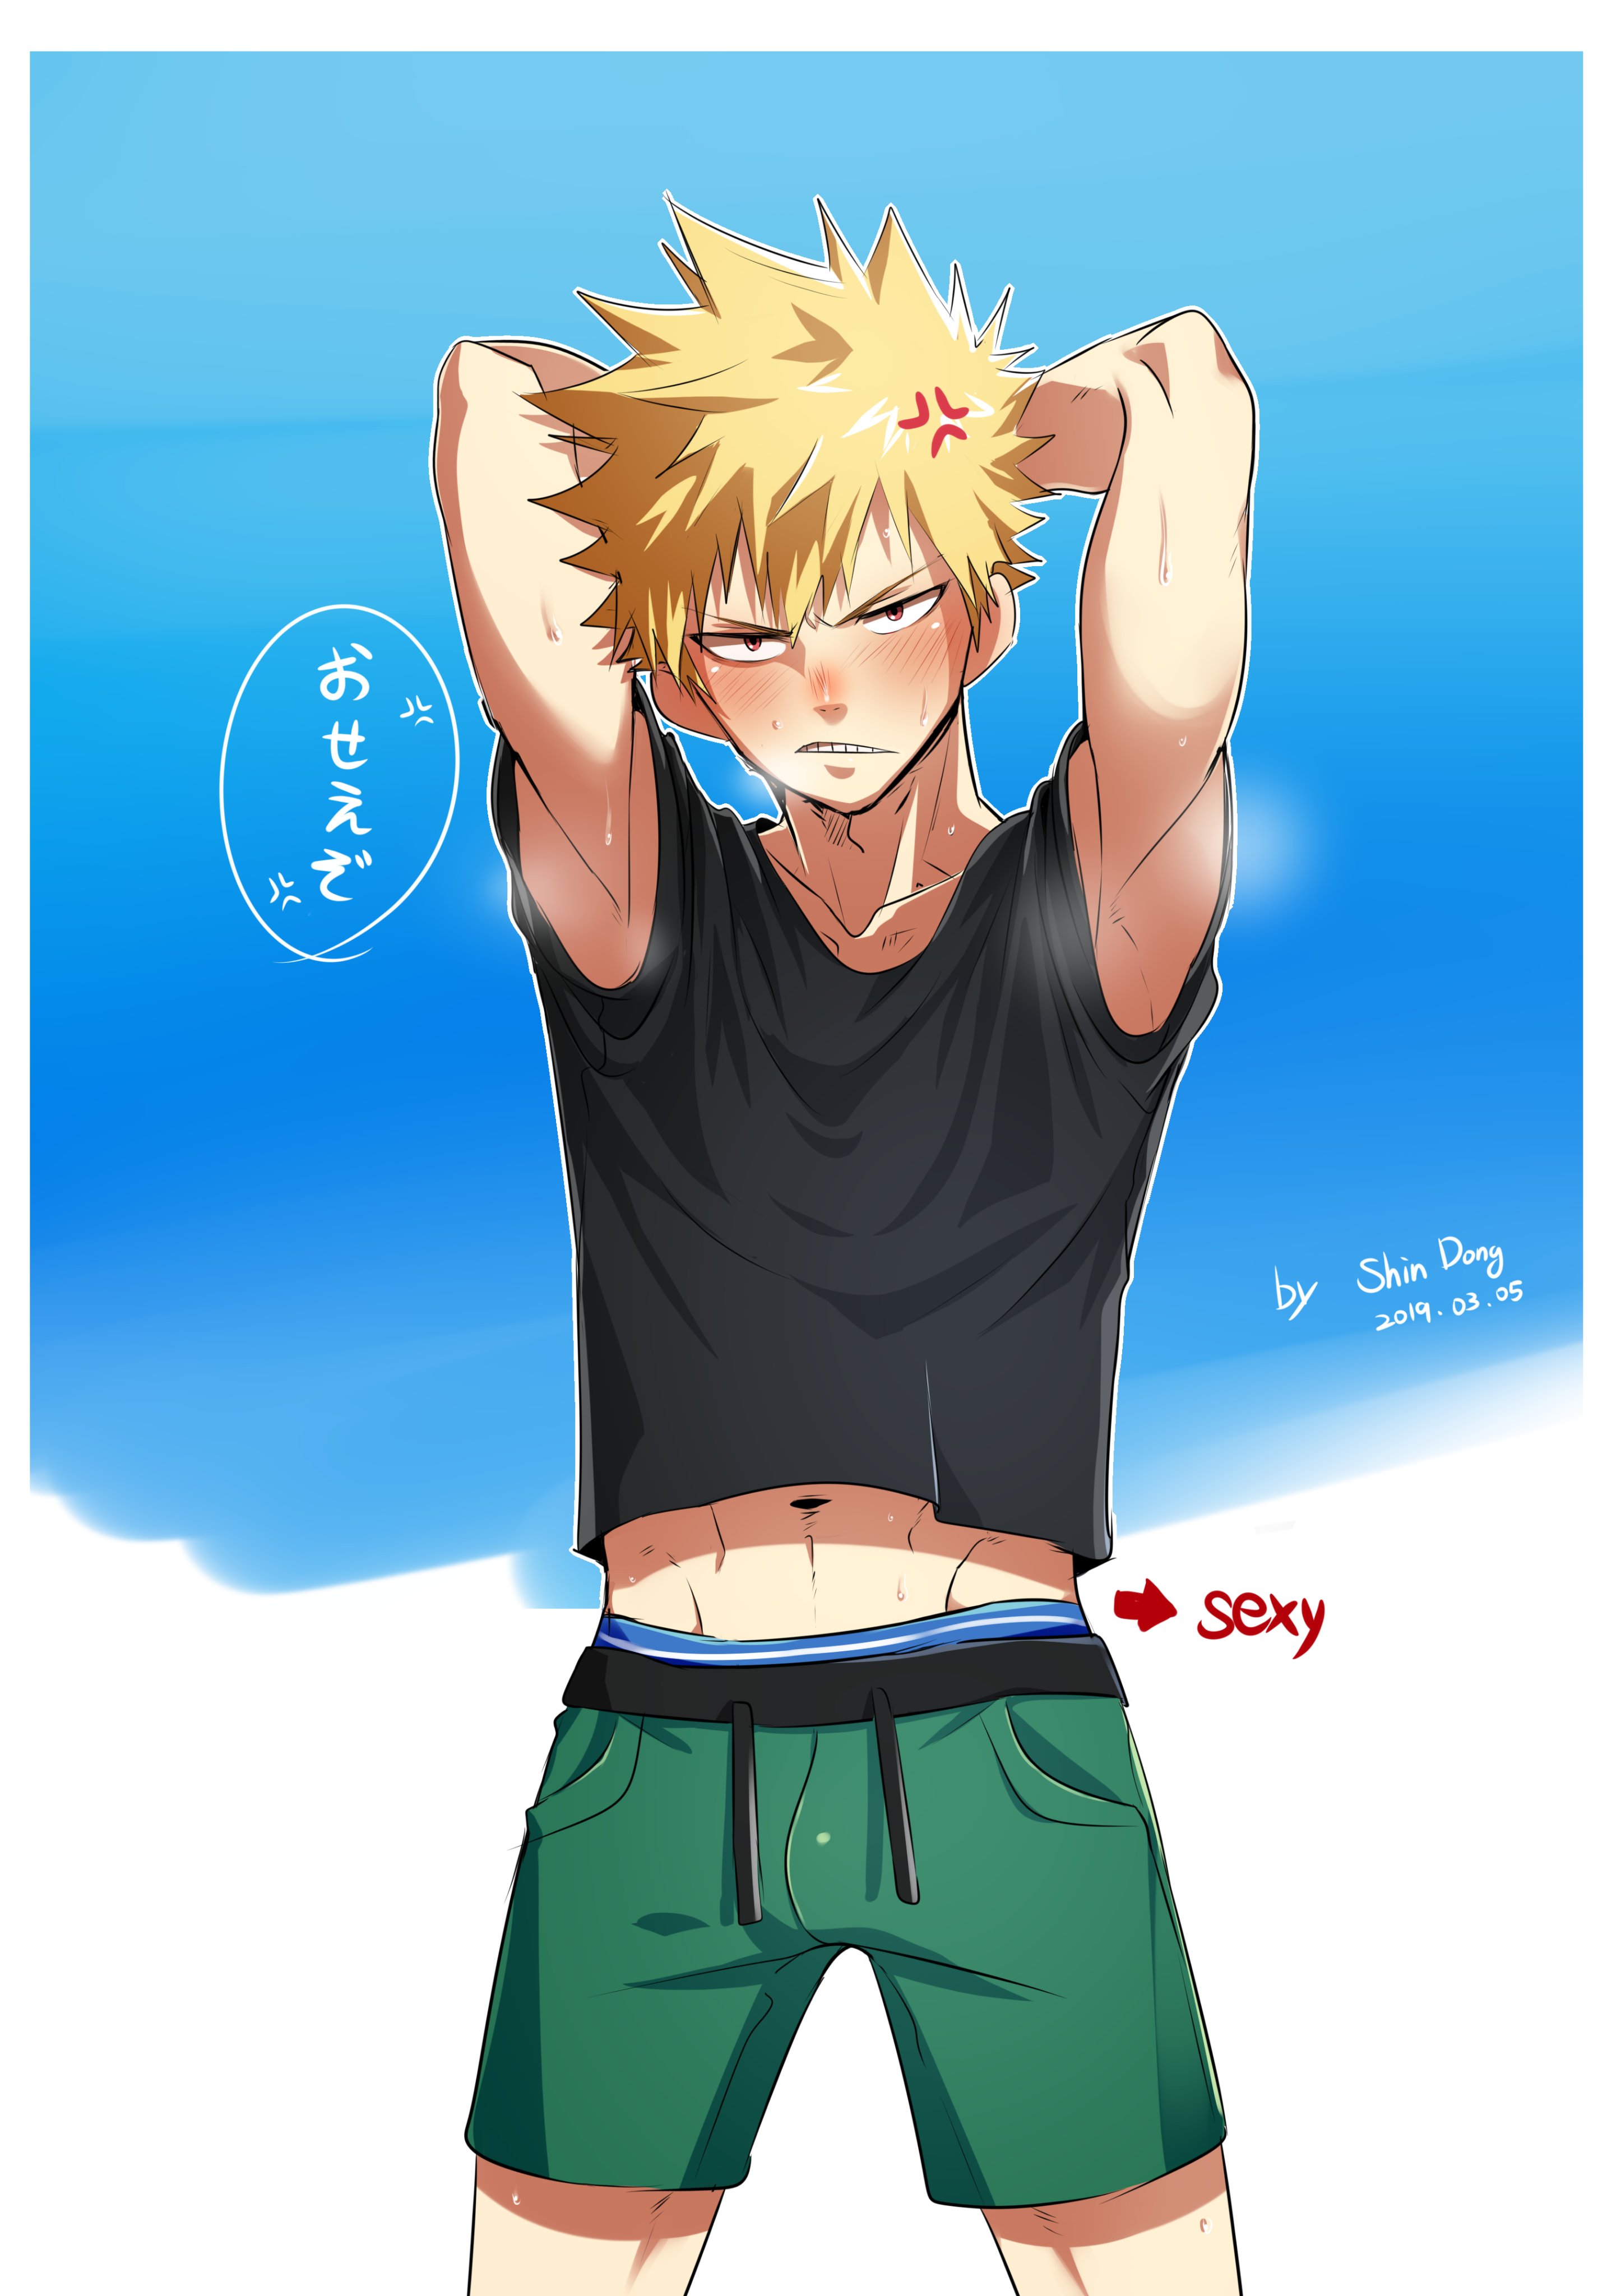 Dong BL on Twitter: "I like here. is sexy very 😆🥰 Bakugou Katsuki from My Academia. https://t.co/NAzqErqCSN" / Twitter